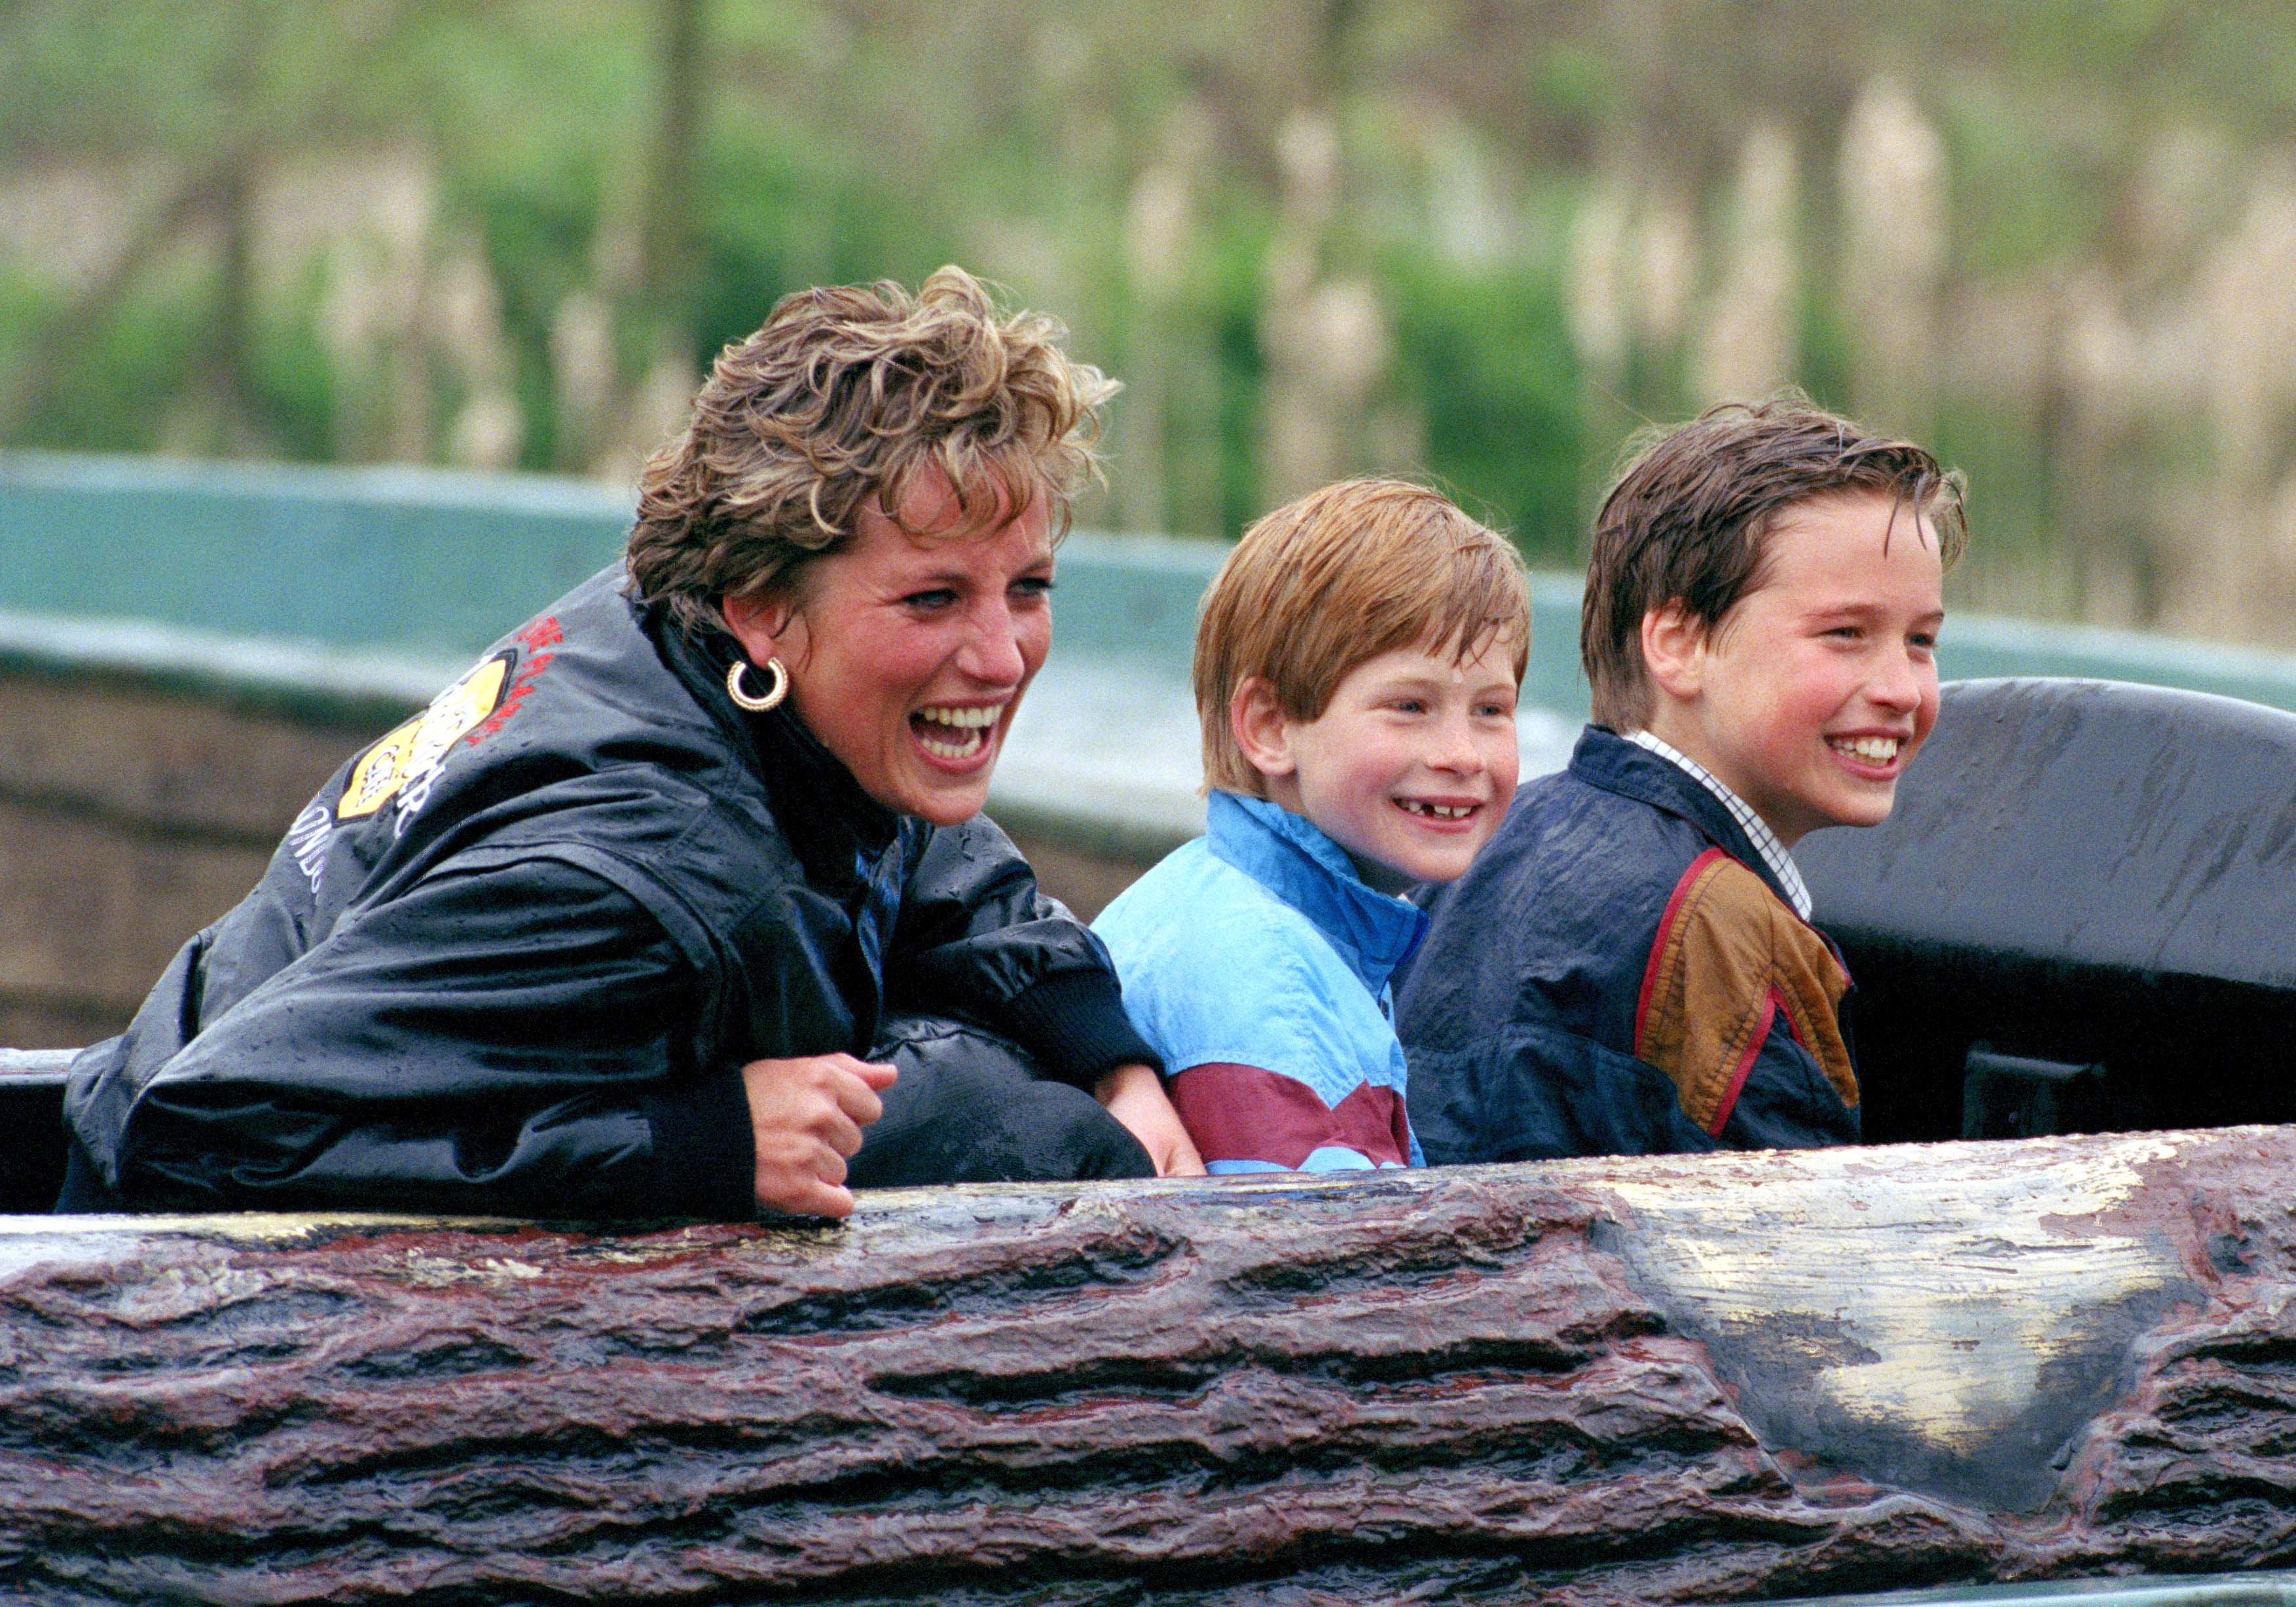 Diana Princess Of Wales, Prince William & Prince Harry Visit The 'Thorpe Park' Amusement Park. | Source: Getty Images